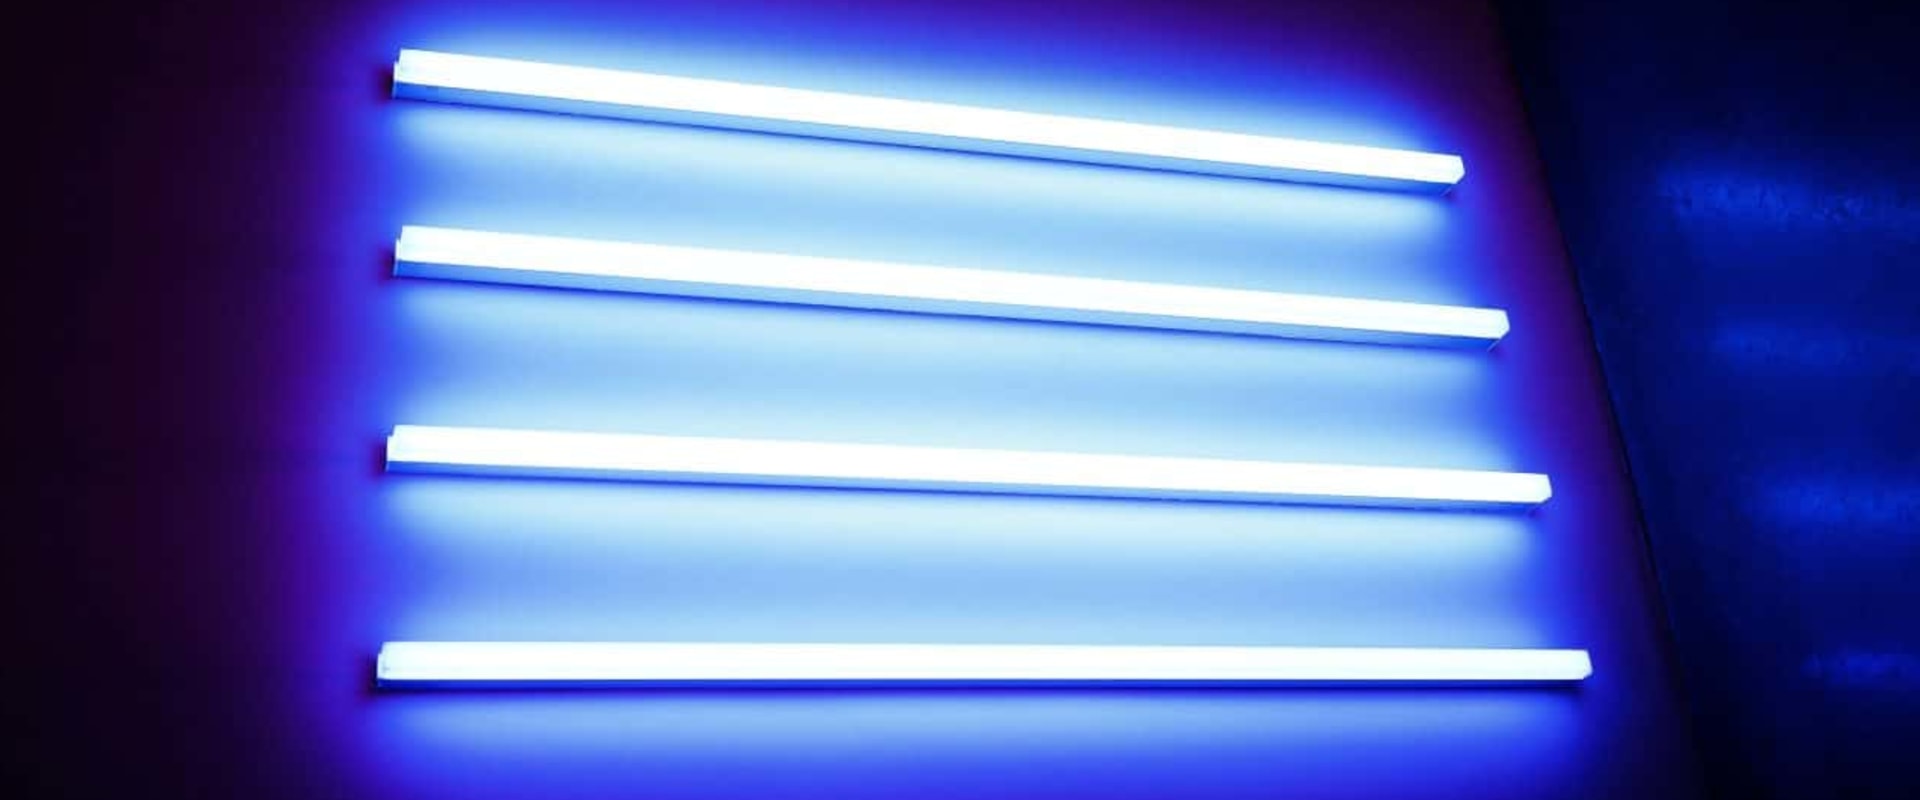 Installing HVAC UV Light in Humid Environments: What You Need to Know